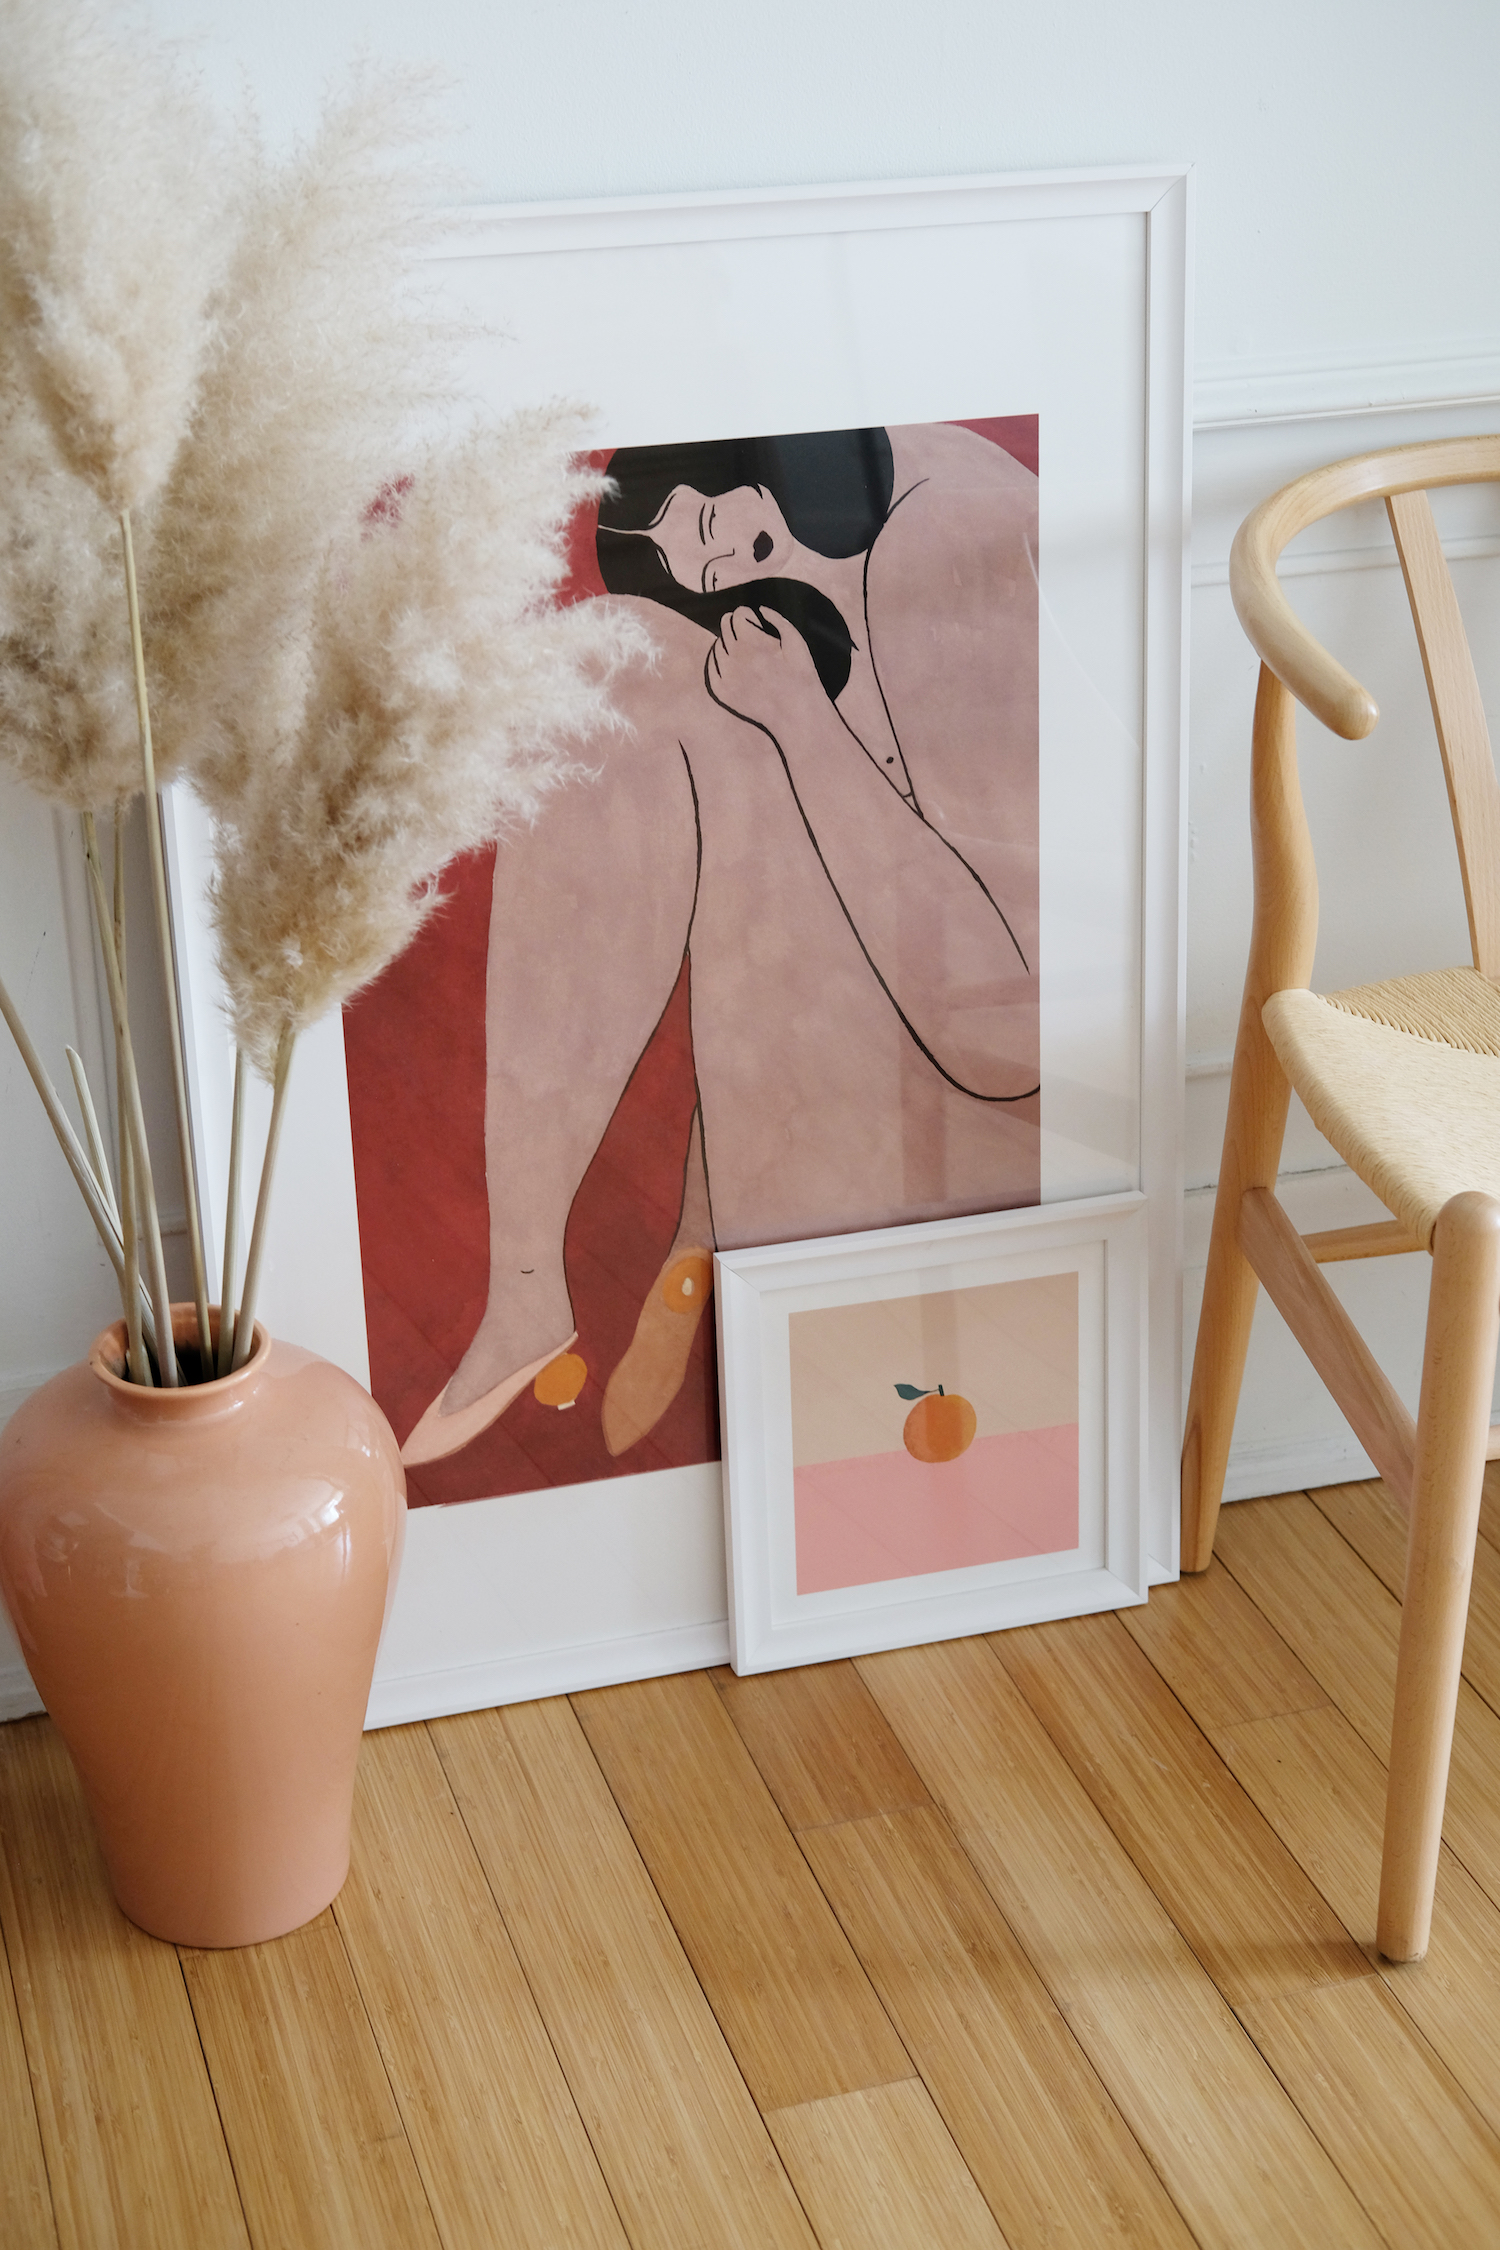 DIY Guide: 3 Easy Ways To Hang A Wall Tapestry - Society6 Blog